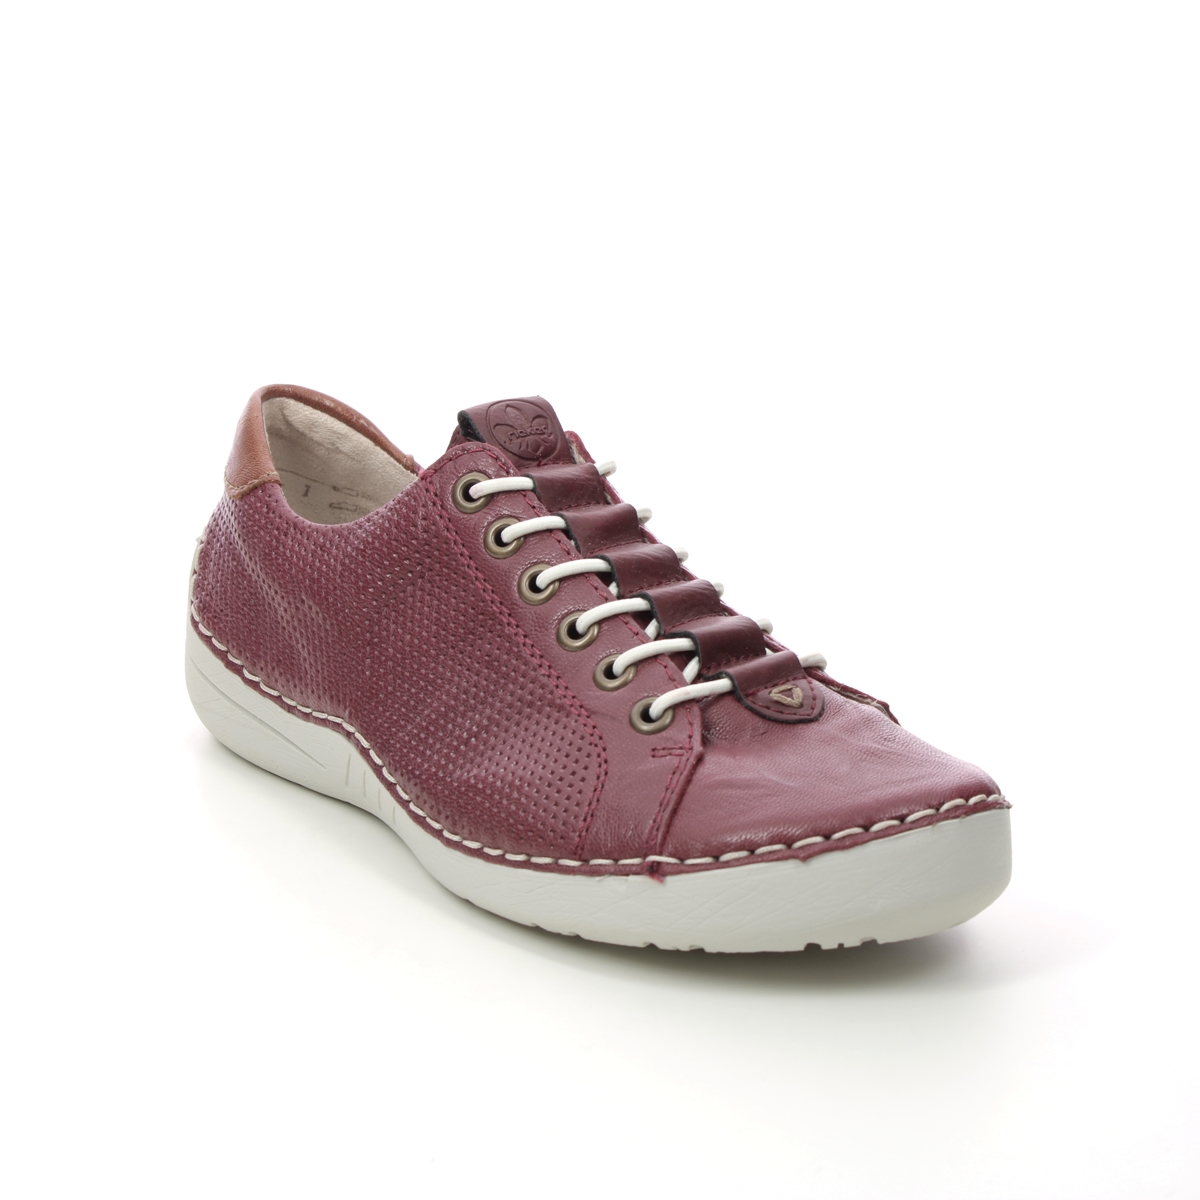 Rieker Funzela Wine Leather Womens Lacing Shoes 52585-35 In Size 40 In Plain Wine Leather